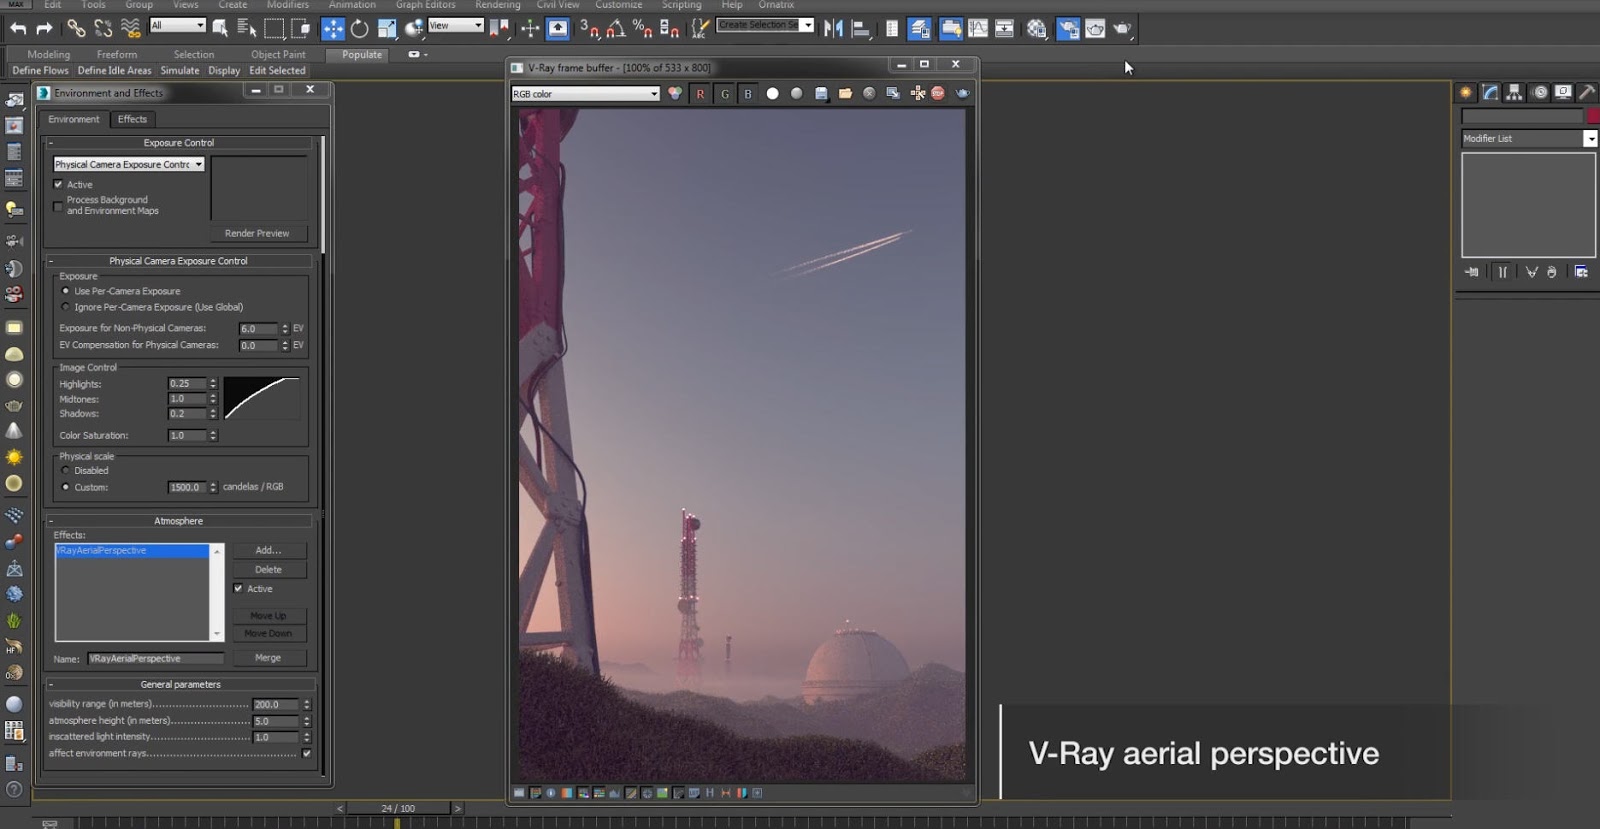 vray for 3ds max 2017 crack free download